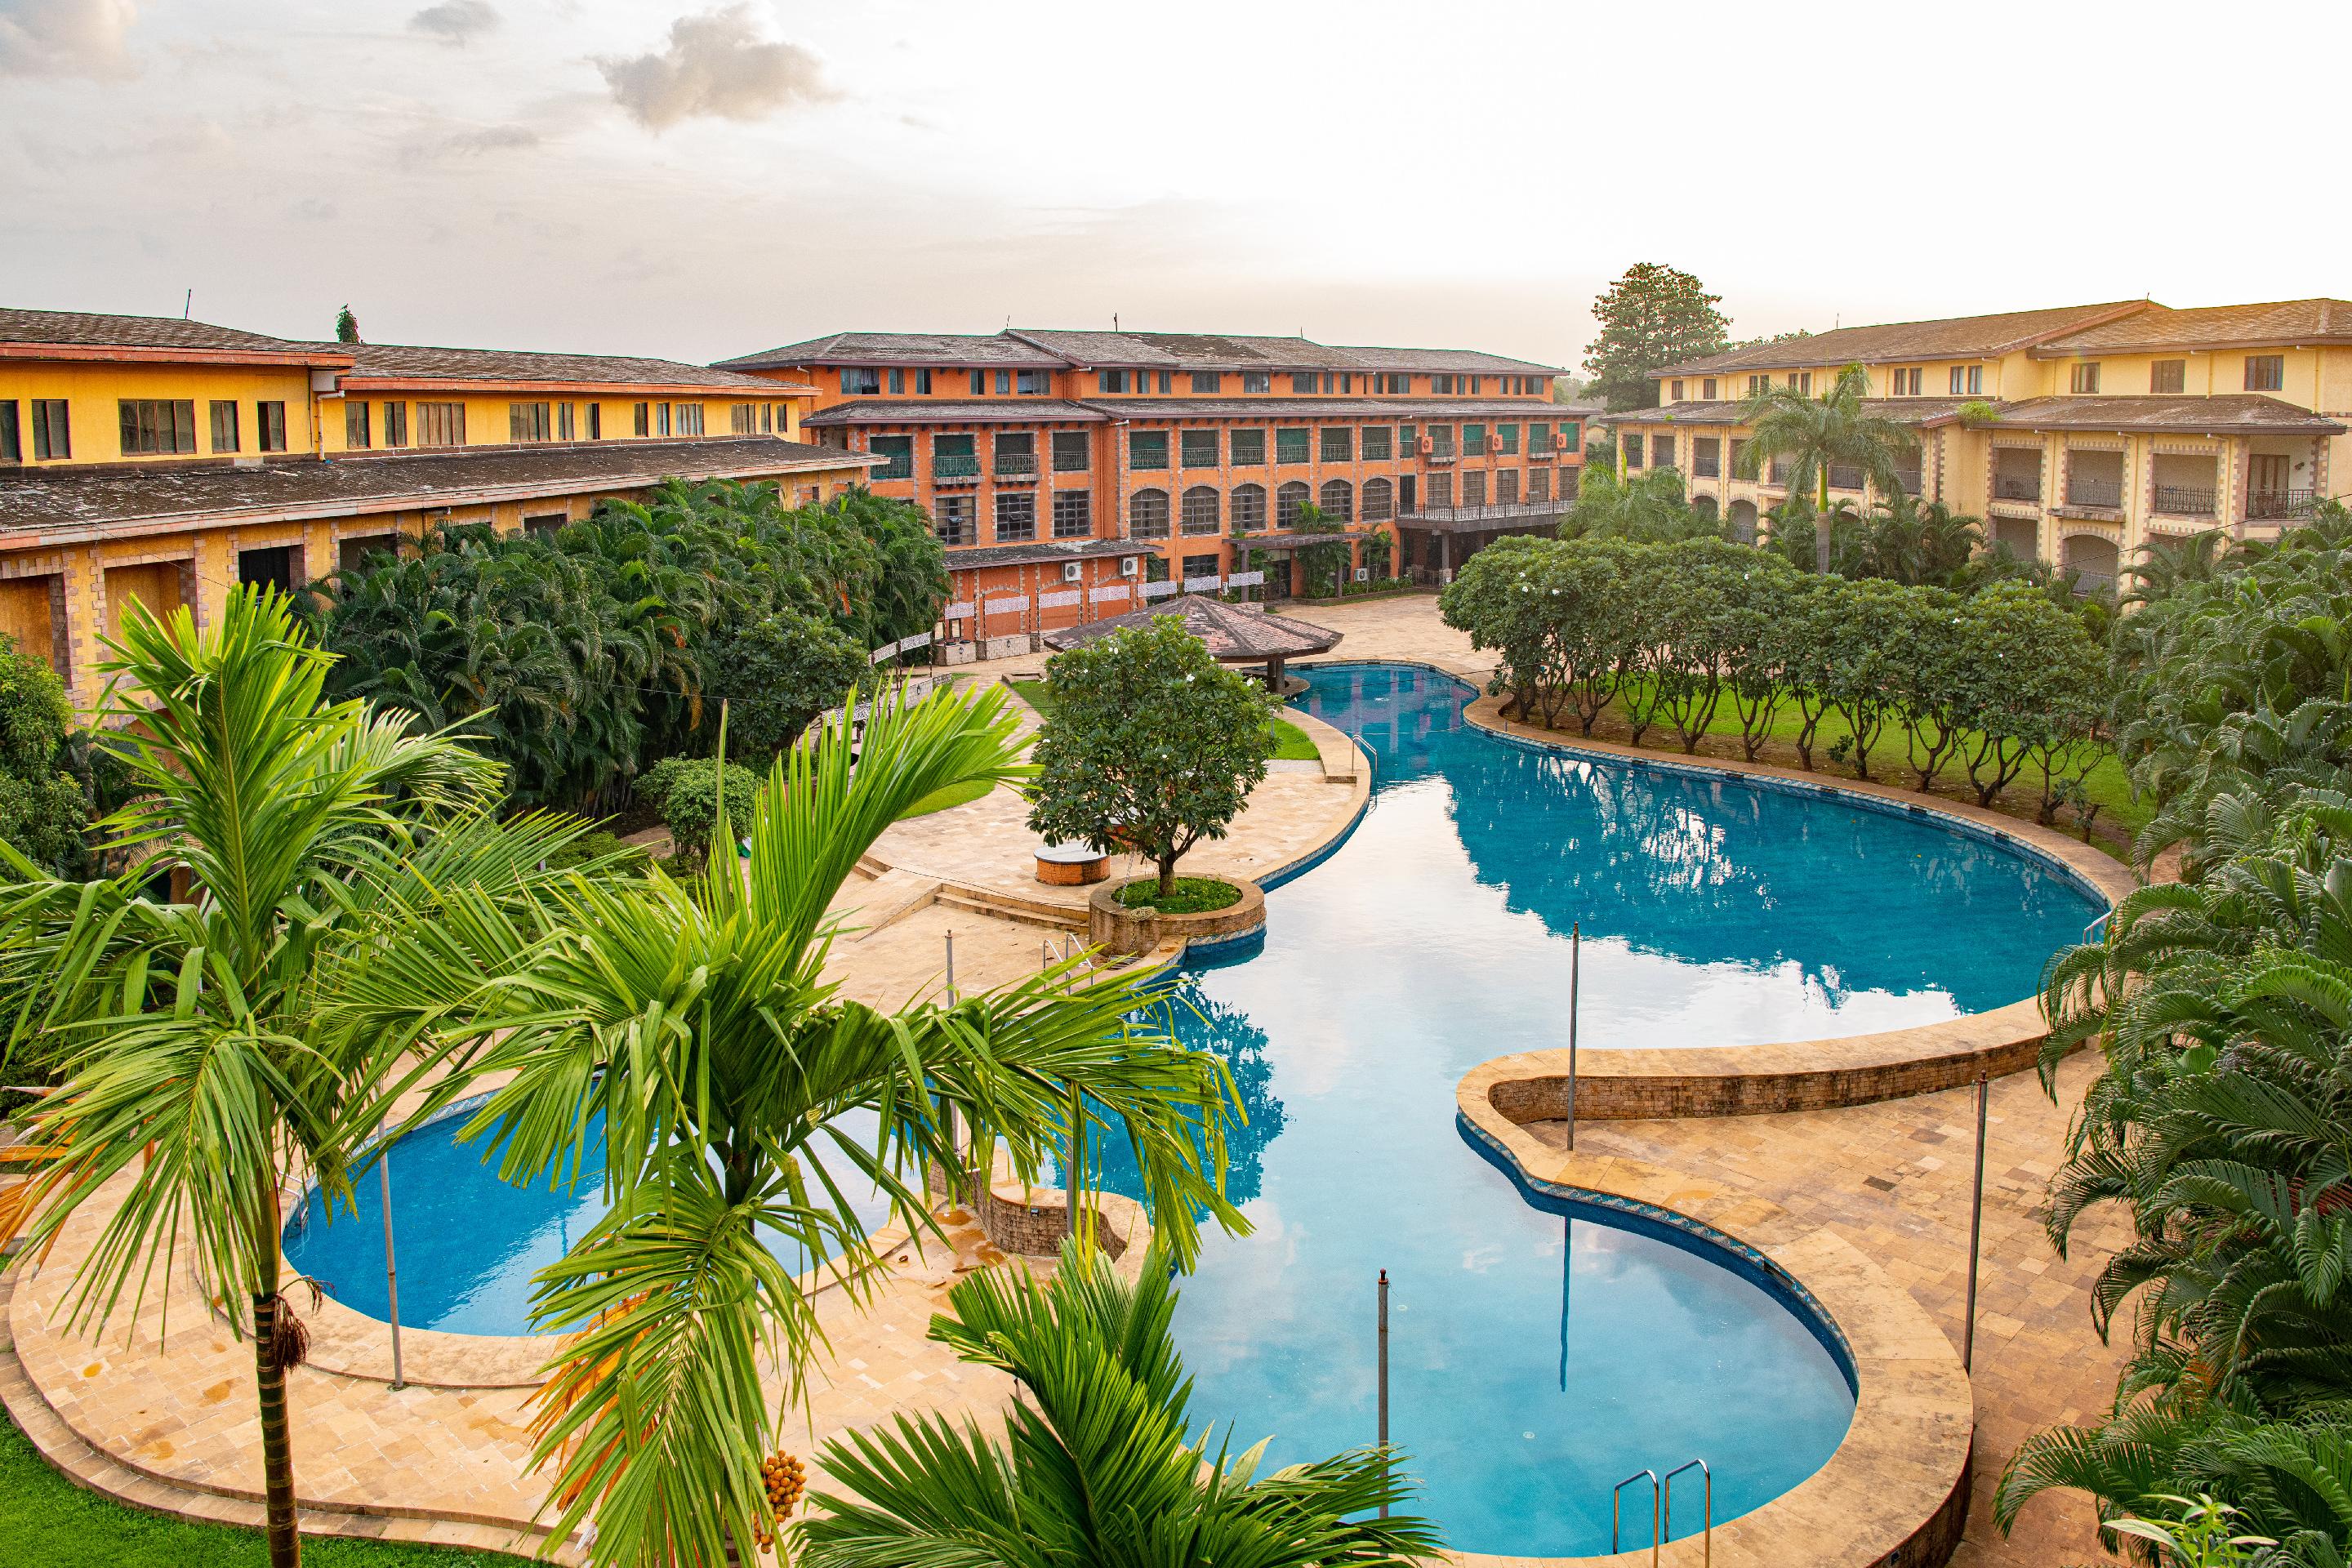 Discover Resorts - Karjat Manager on Duty (MOD REPORT)